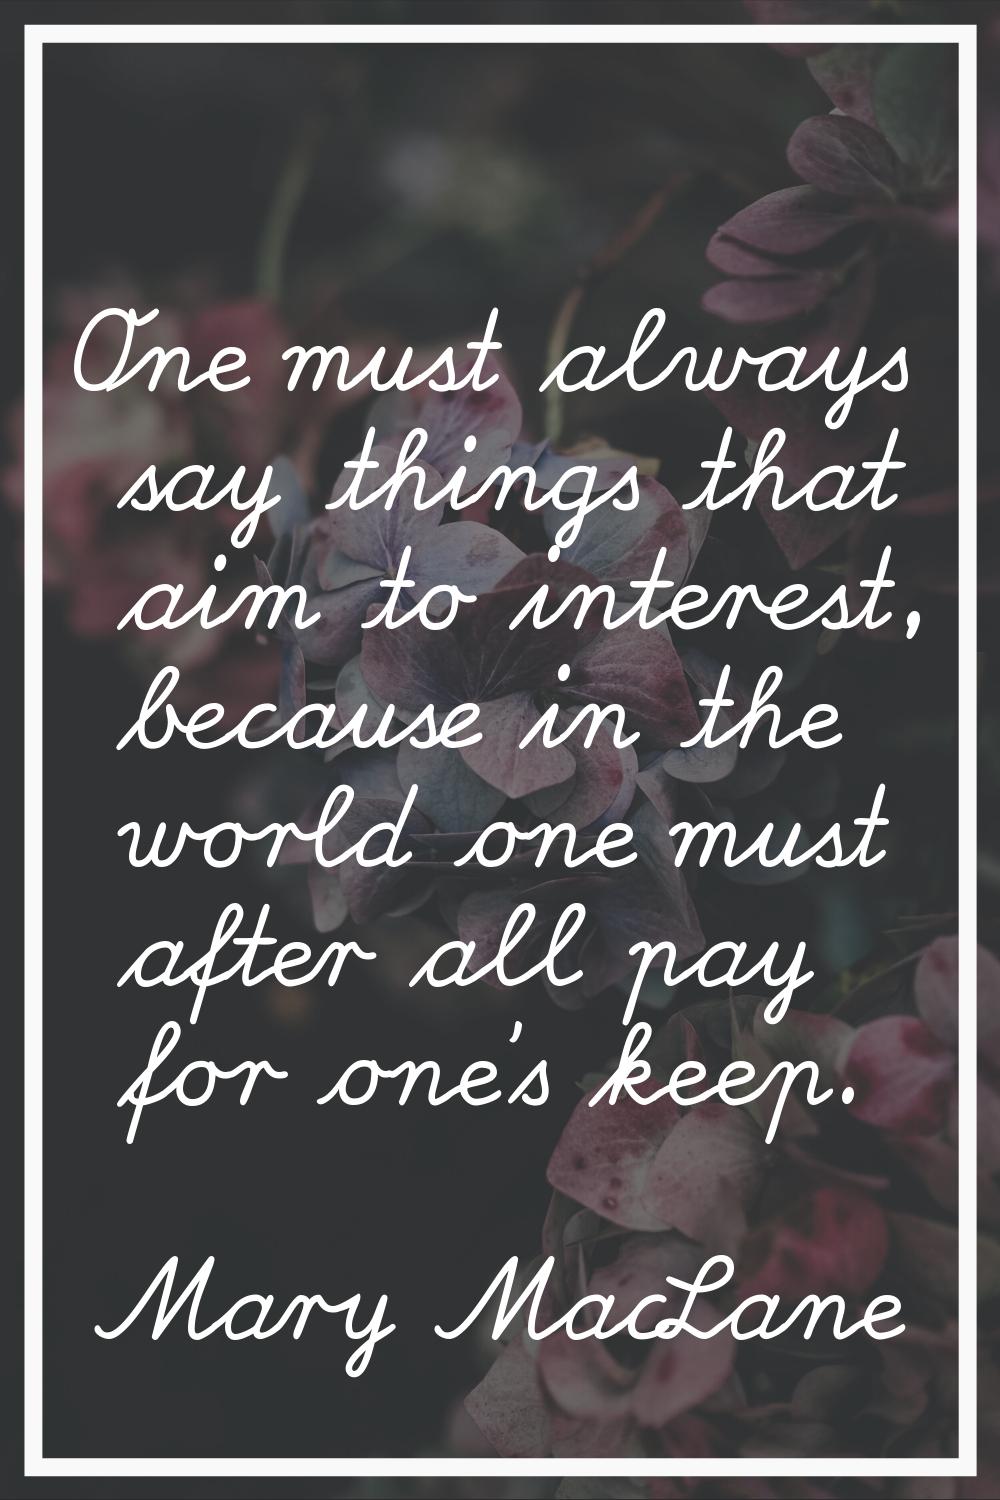 One must always say things that aim to interest, because in the world one must after all pay for on